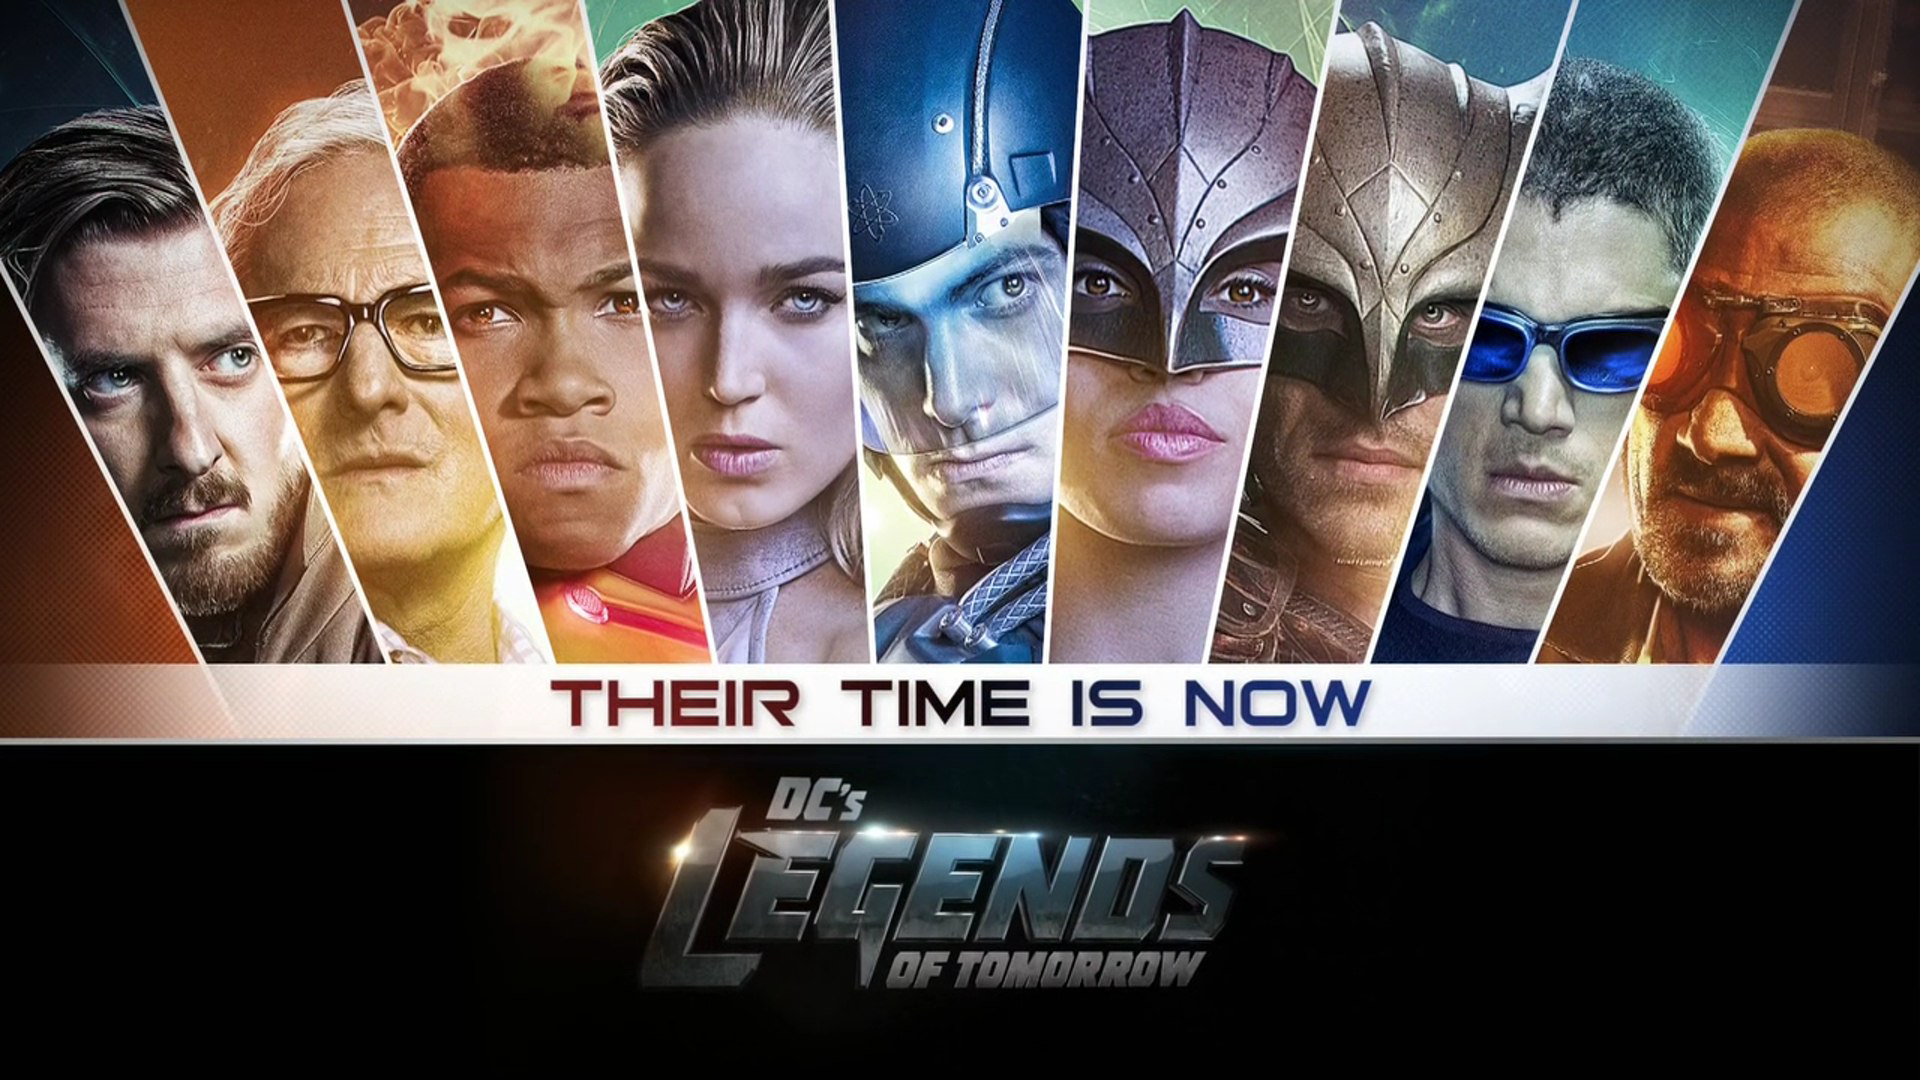 Show of today, 'Legends of Tomorrow